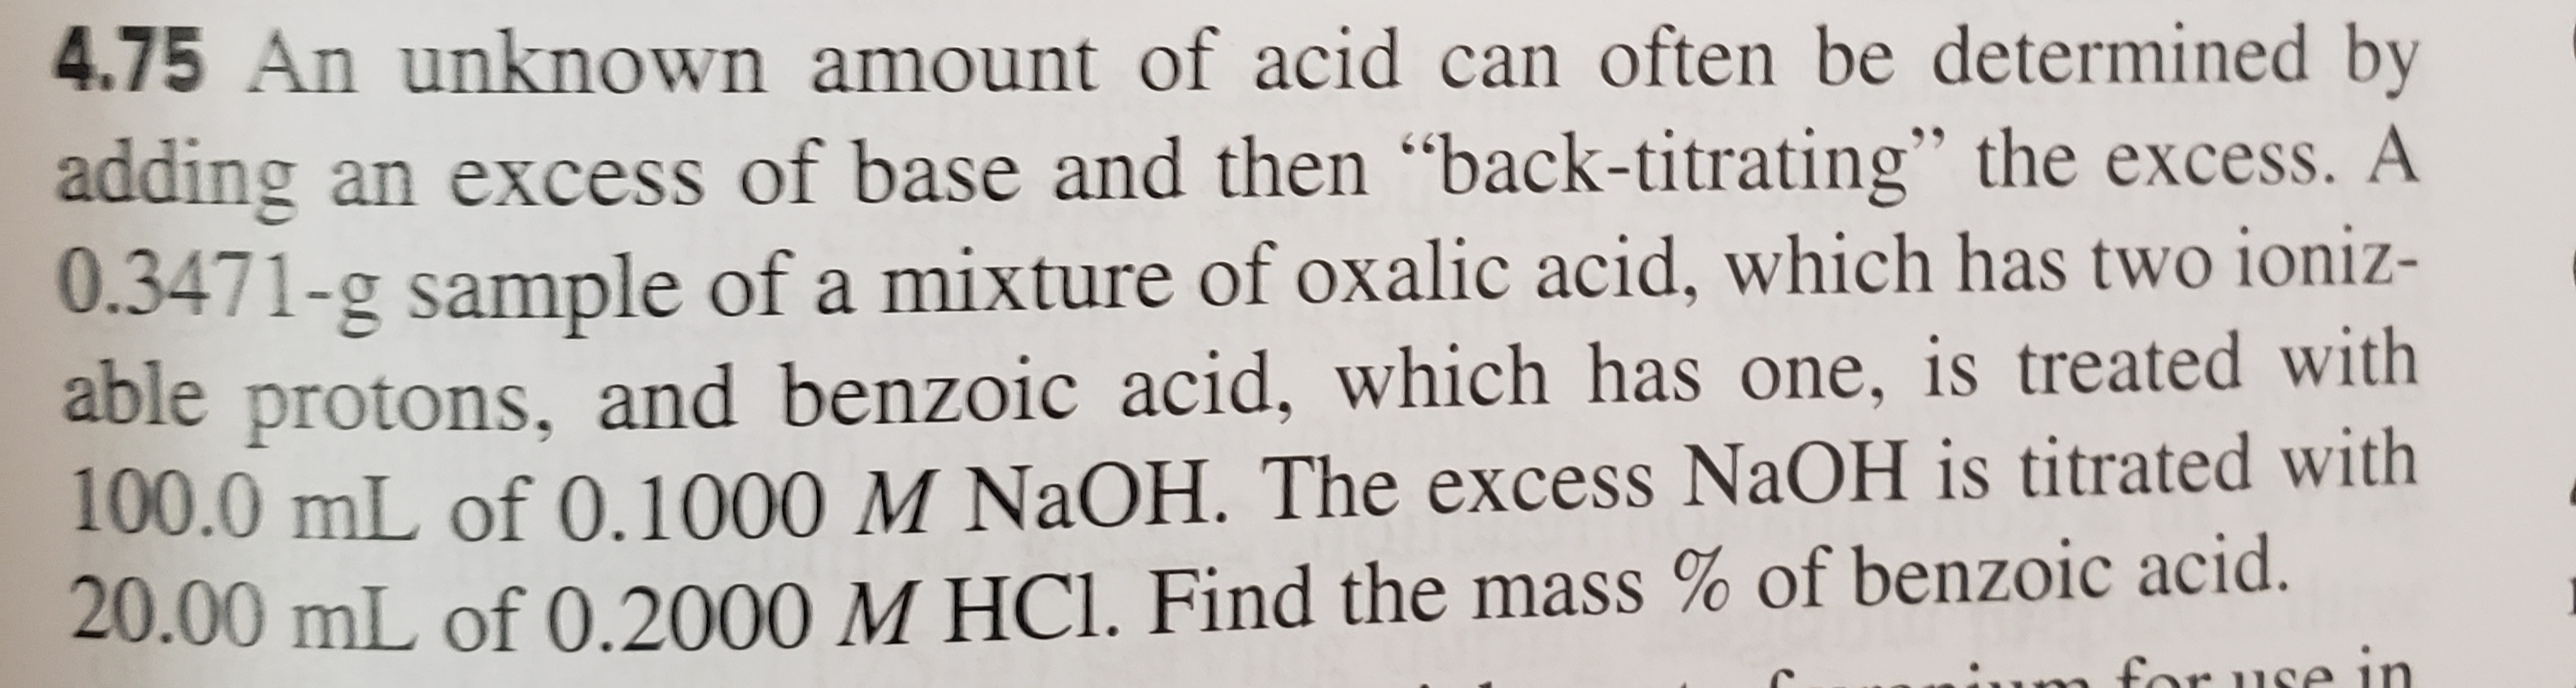 4.75 An unknown amount of acid can often be determined by
adding an excess of base and then "back-titrating" the excess. A
0.3471-g sample of a mixture of oxalic acid, which has two ioniz-
able protons, and benzoic acid, which has one, is treated with
T00.0 mL of 0.1000 M NaOH. The excess NaOH is titrated with
20.00 mL of 0.2000 M HCI. Find the mass % of benzoic acid.
ruse in
for
